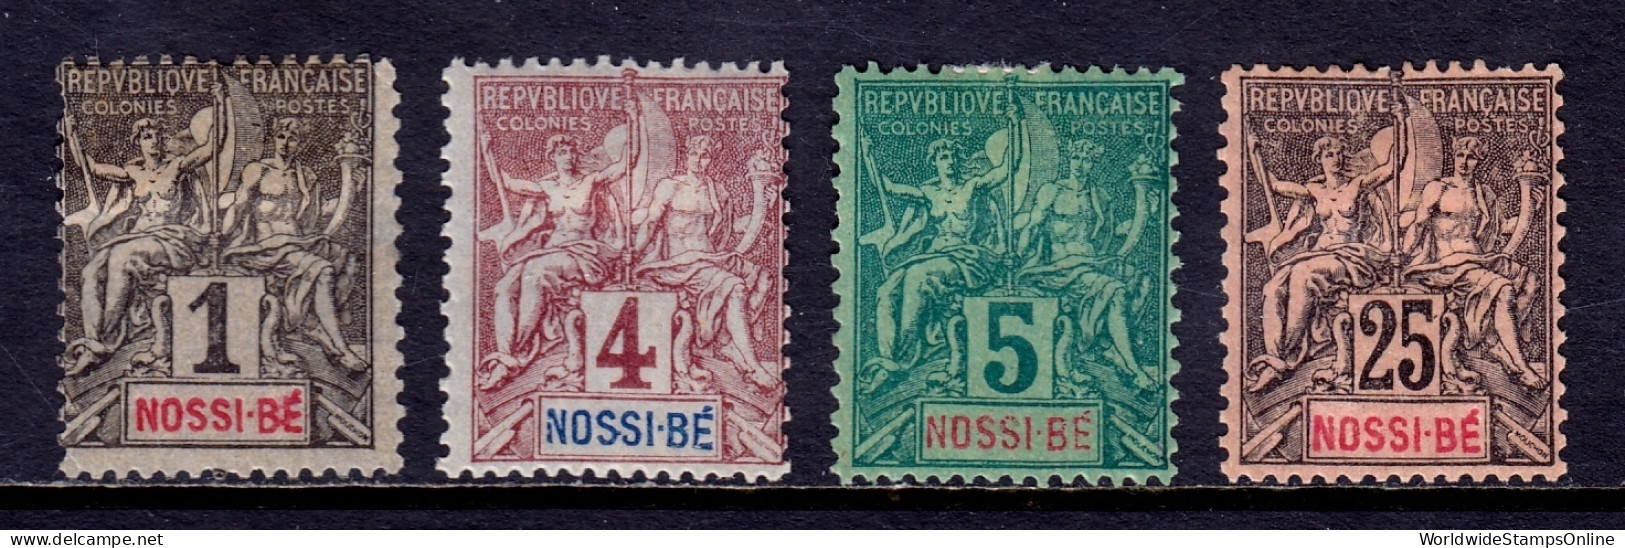 Nossi-Be - Scott #32//39 - MH - Short Set, Some Gum Loss/thinning - SCV $24 - Unused Stamps